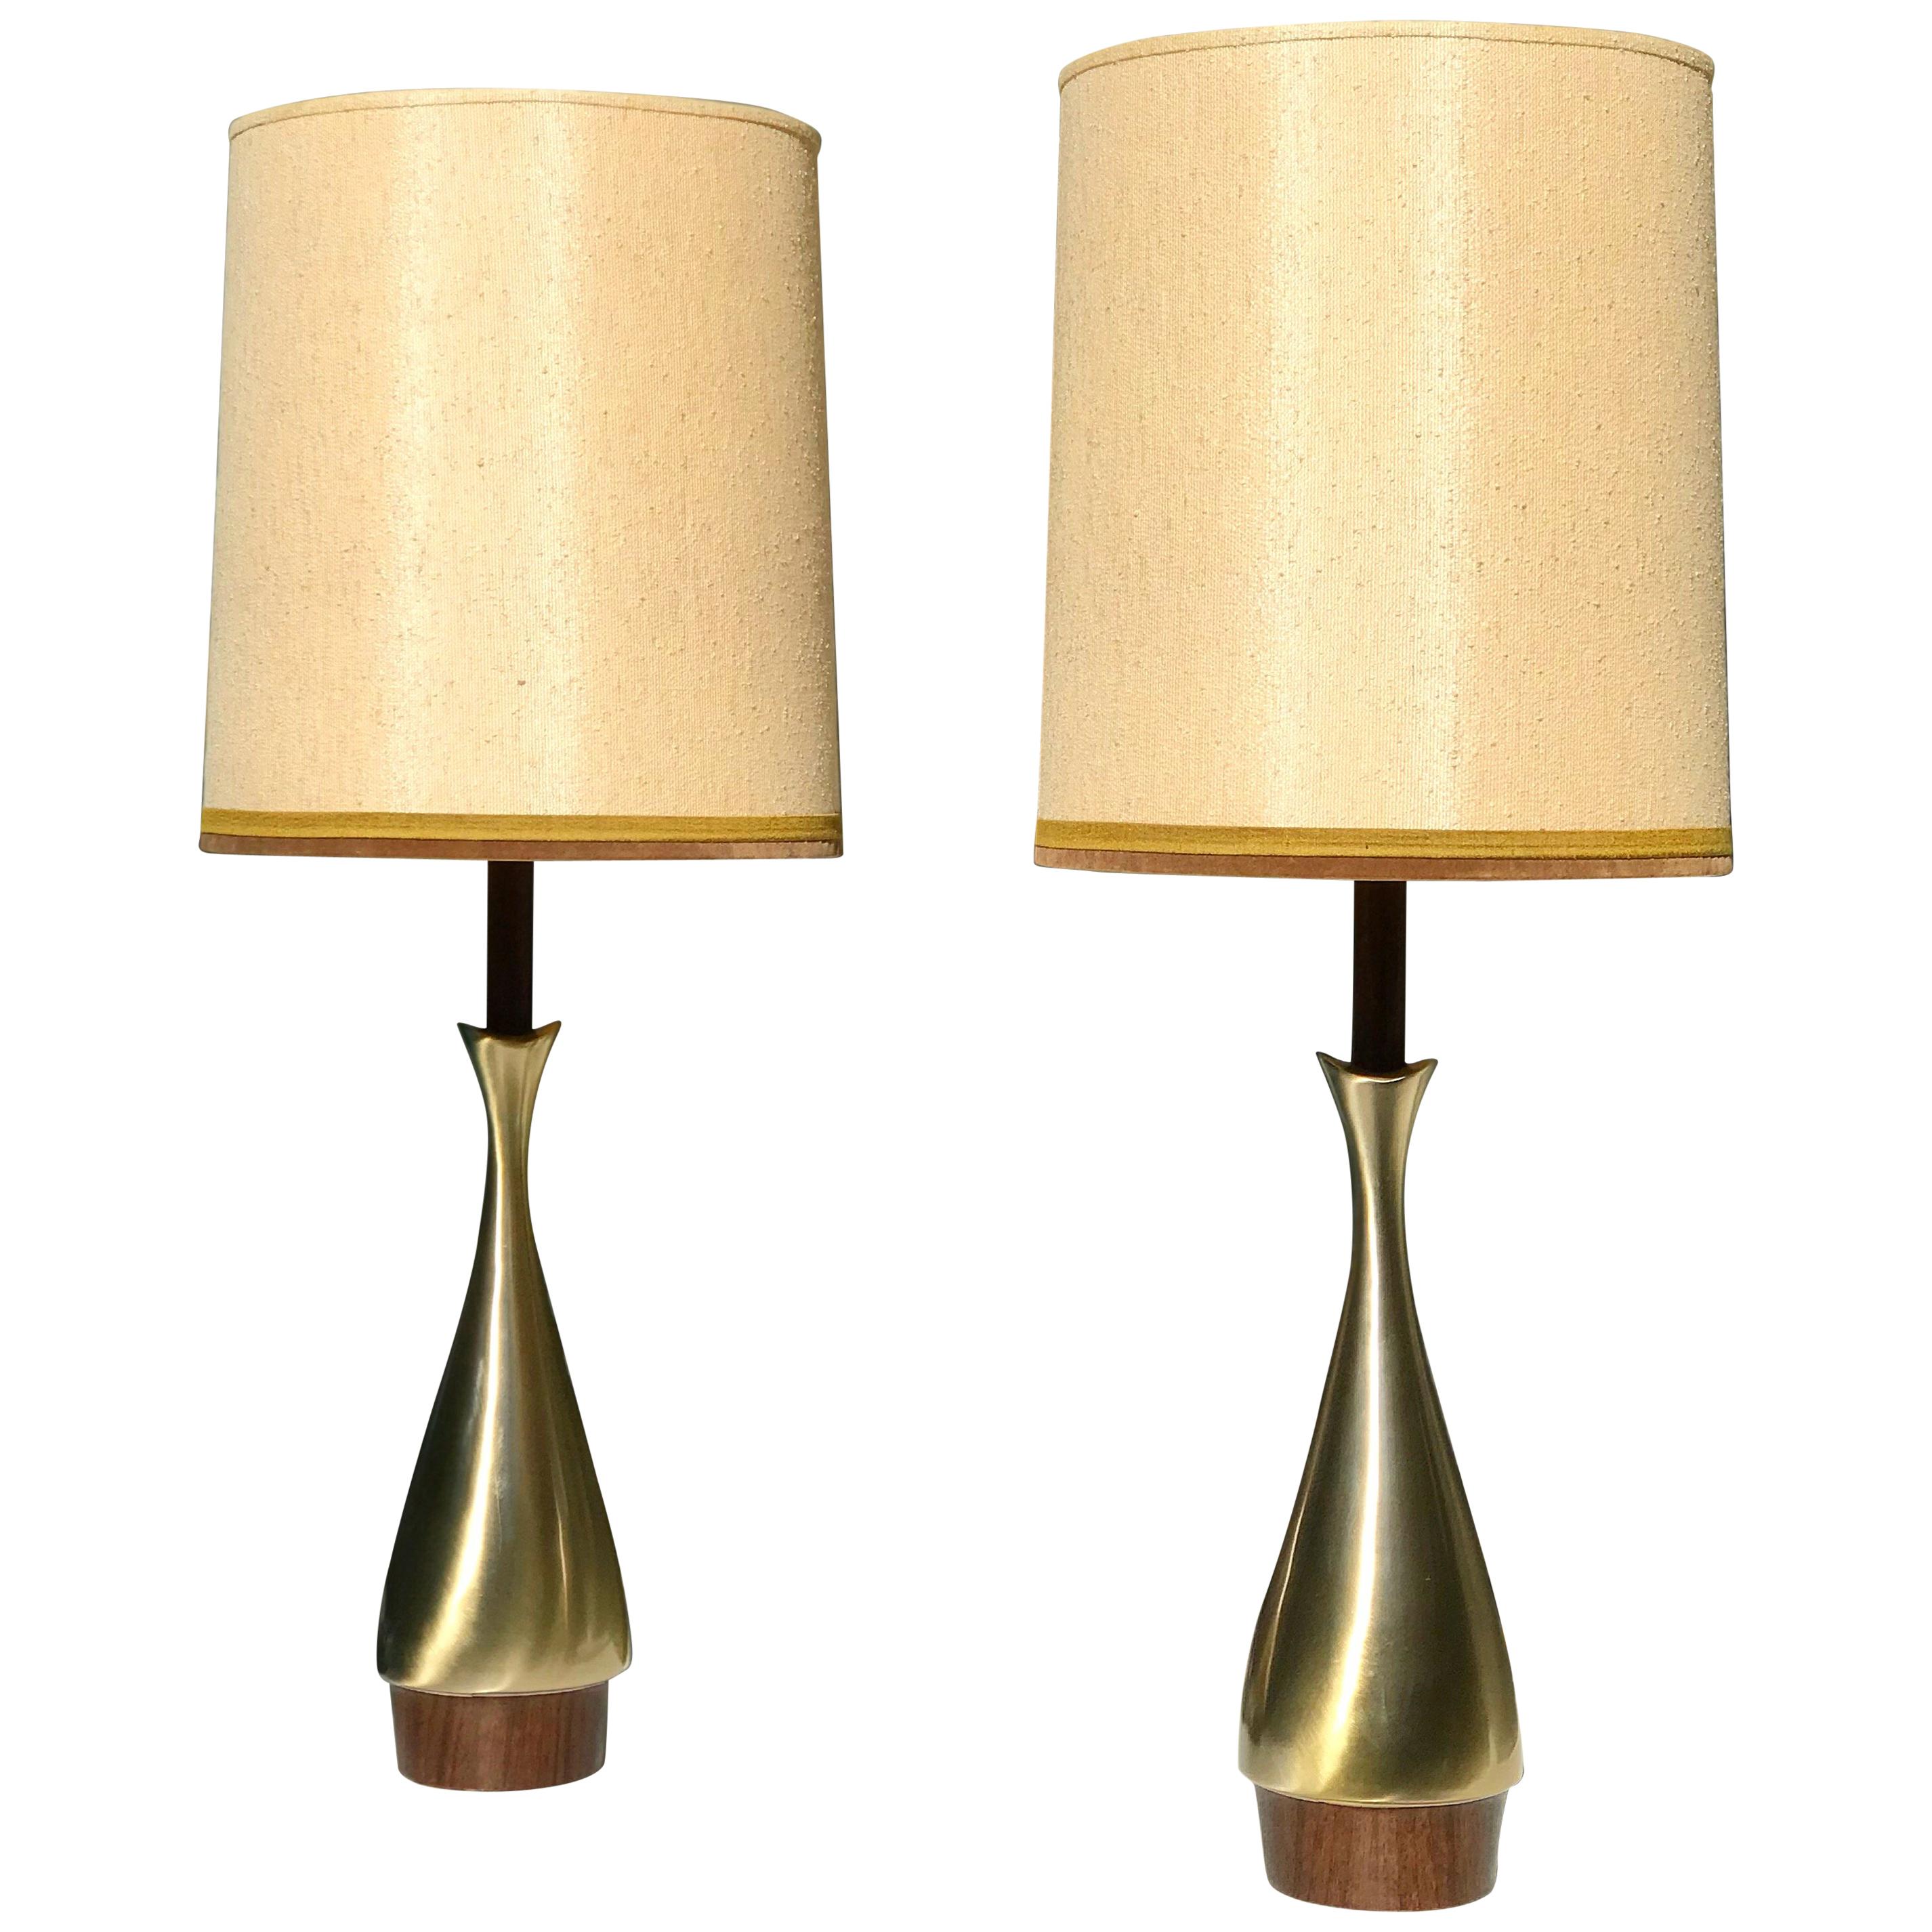 Pair of Fluted Genie Brass Tables Lamps by Laurel Lamp Co.